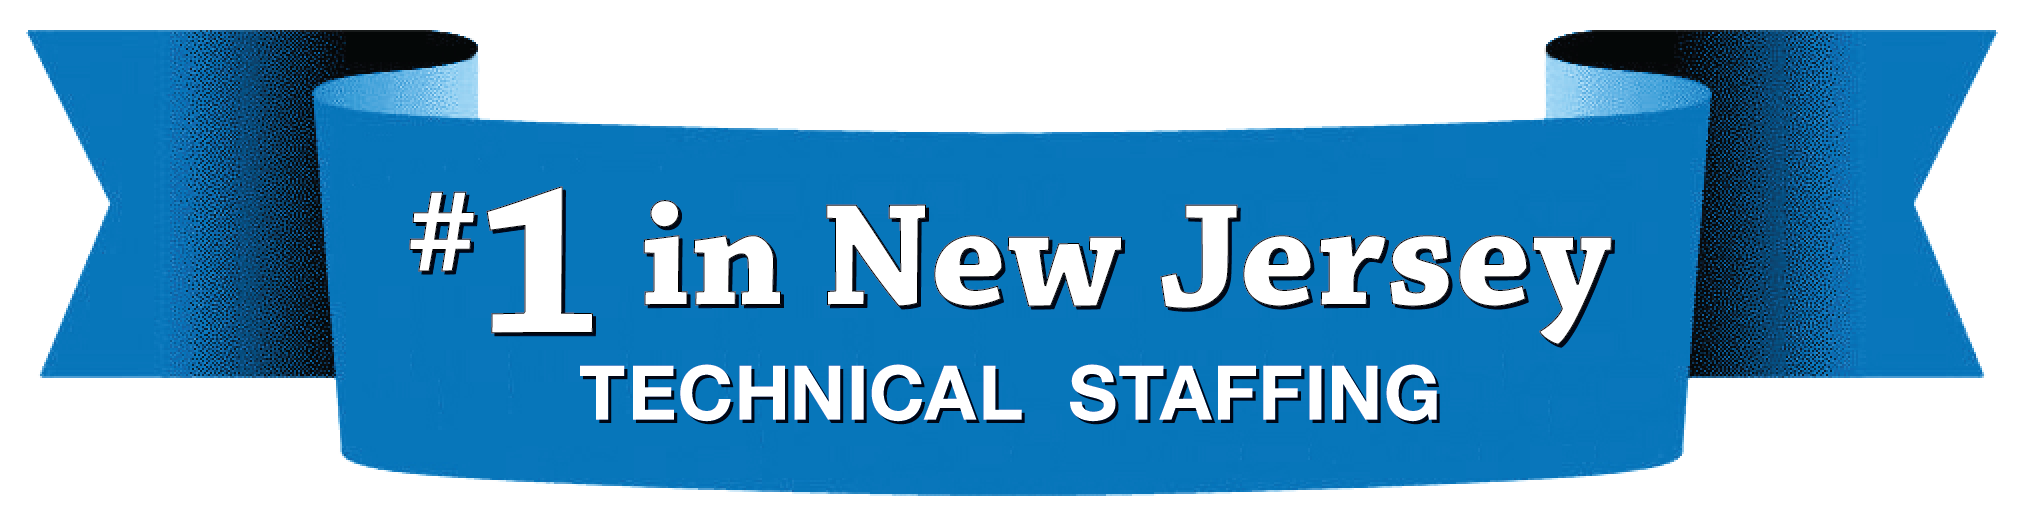 #1 in NJ - Technical Staffing